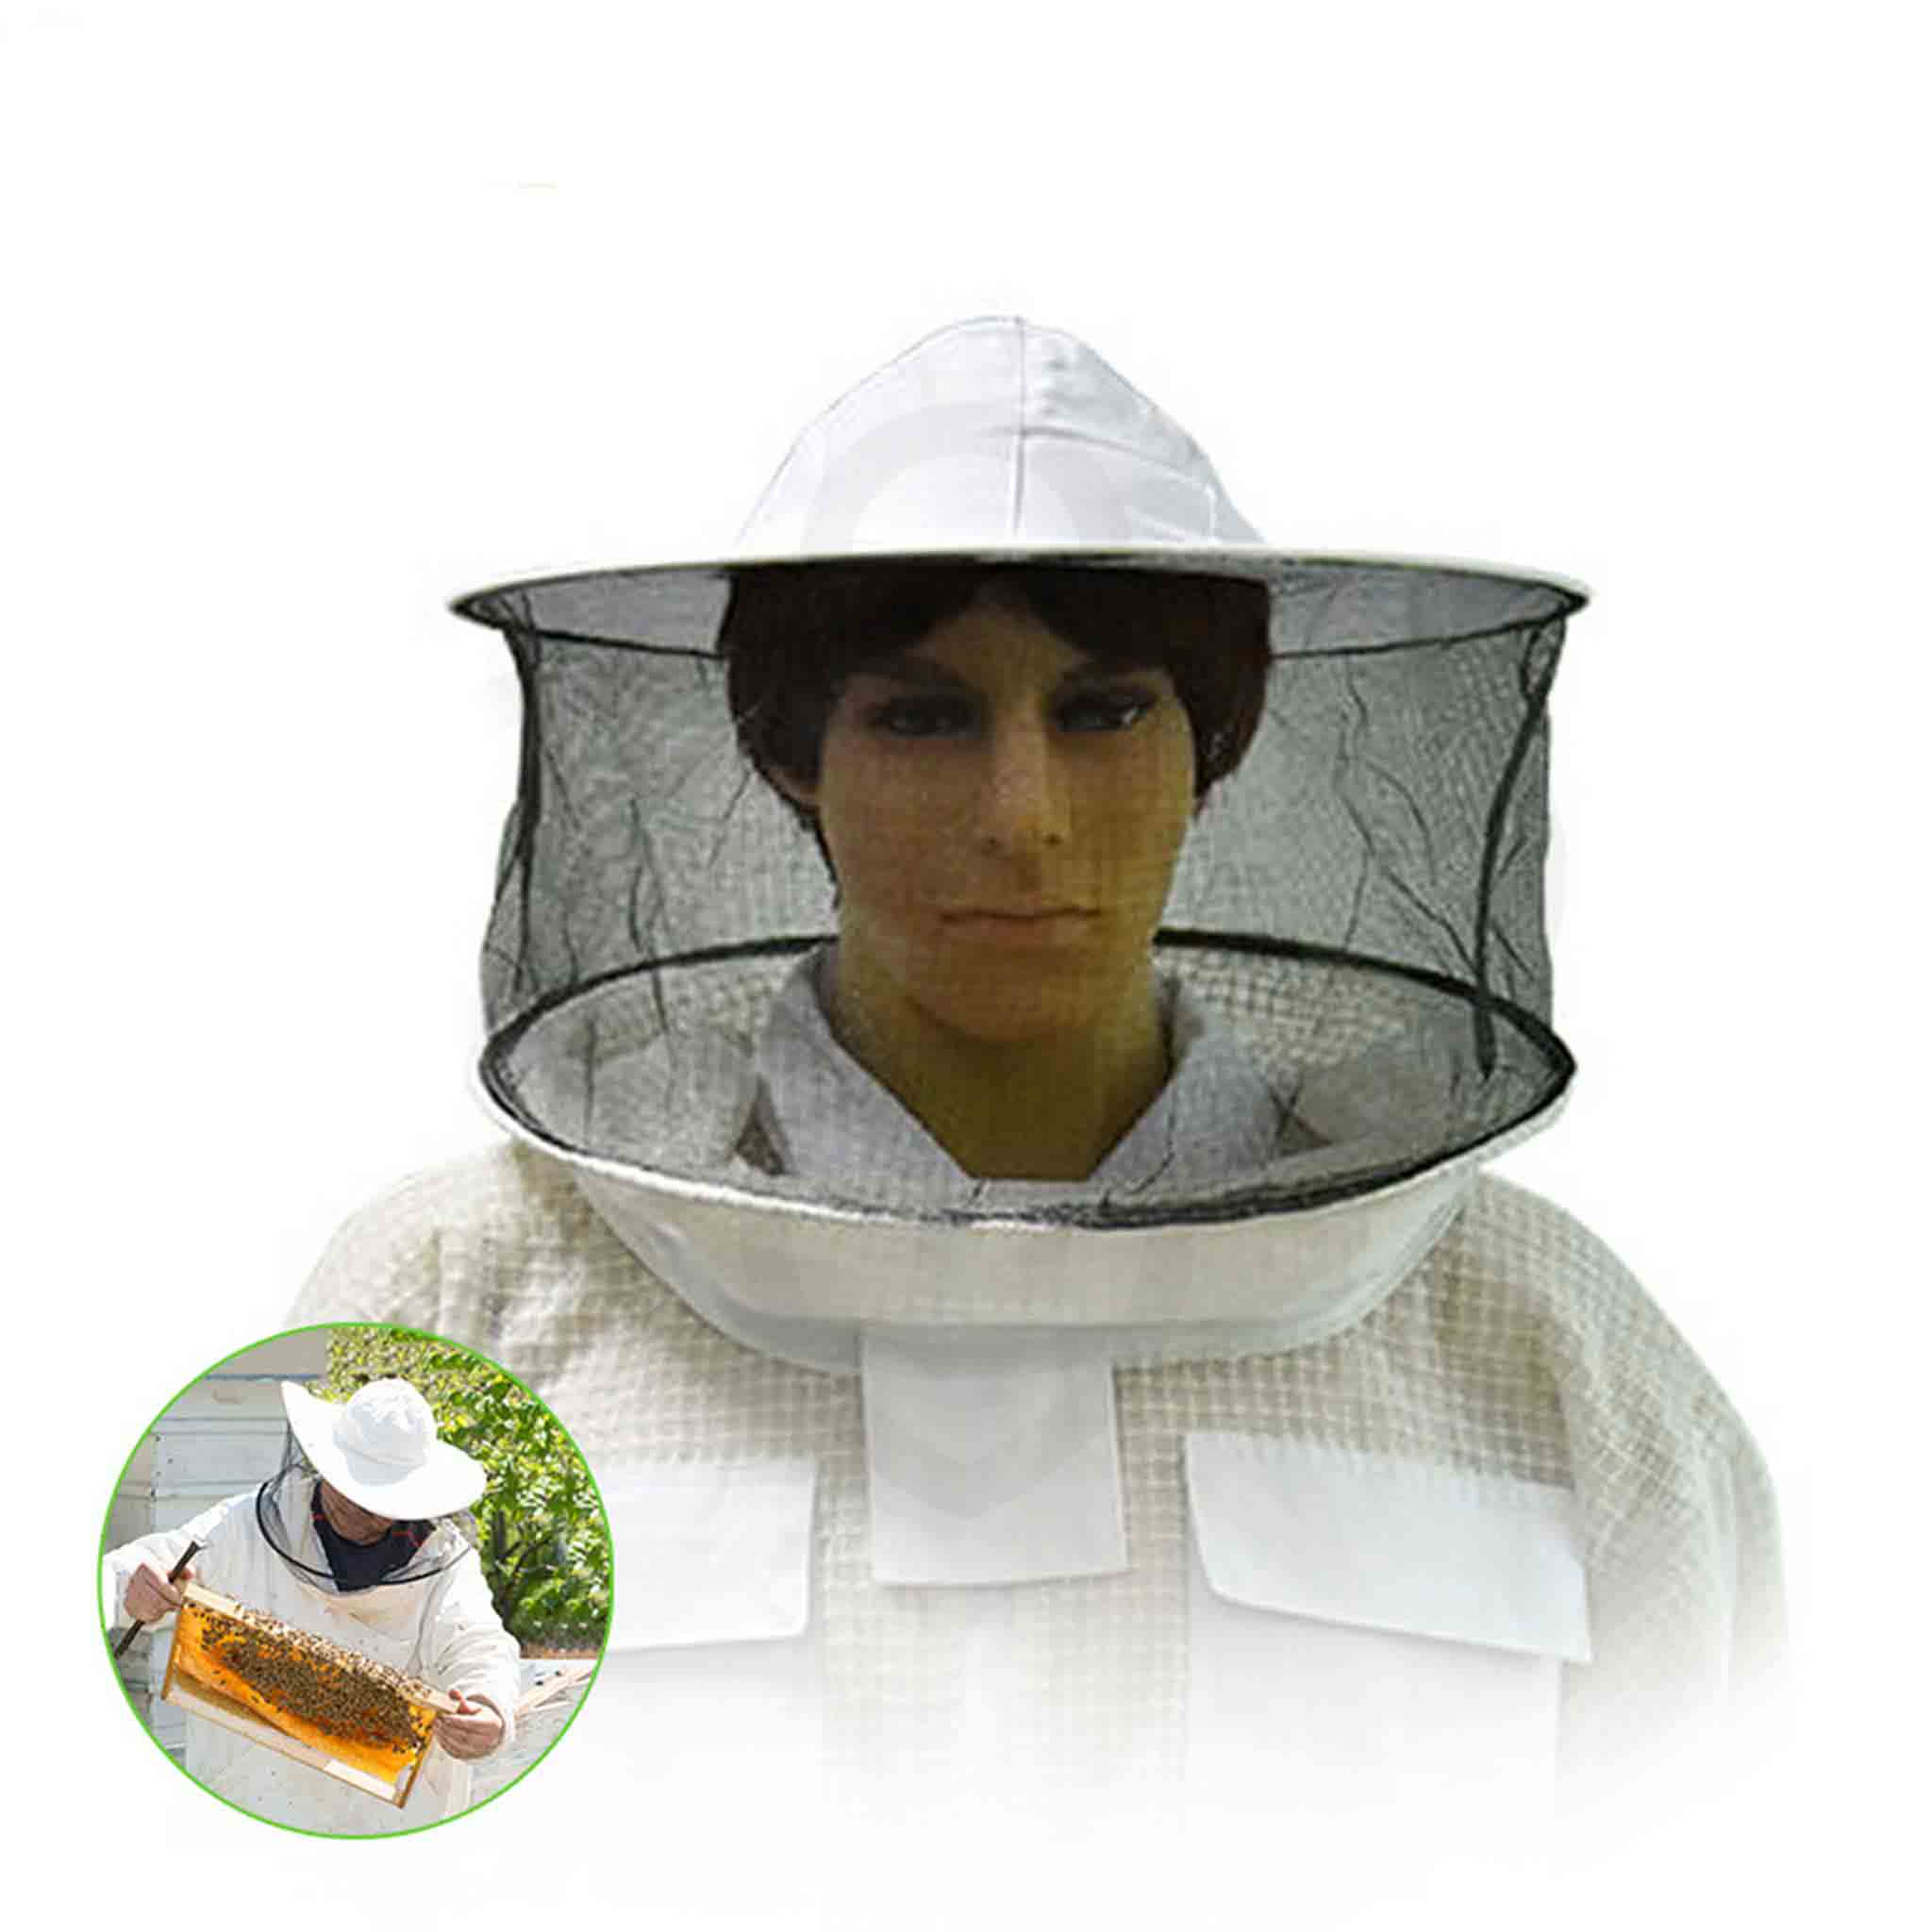 Beekeeping Protective Round Hat and Veil - Clothing collection by Buzzbee Beekeeping Supplies